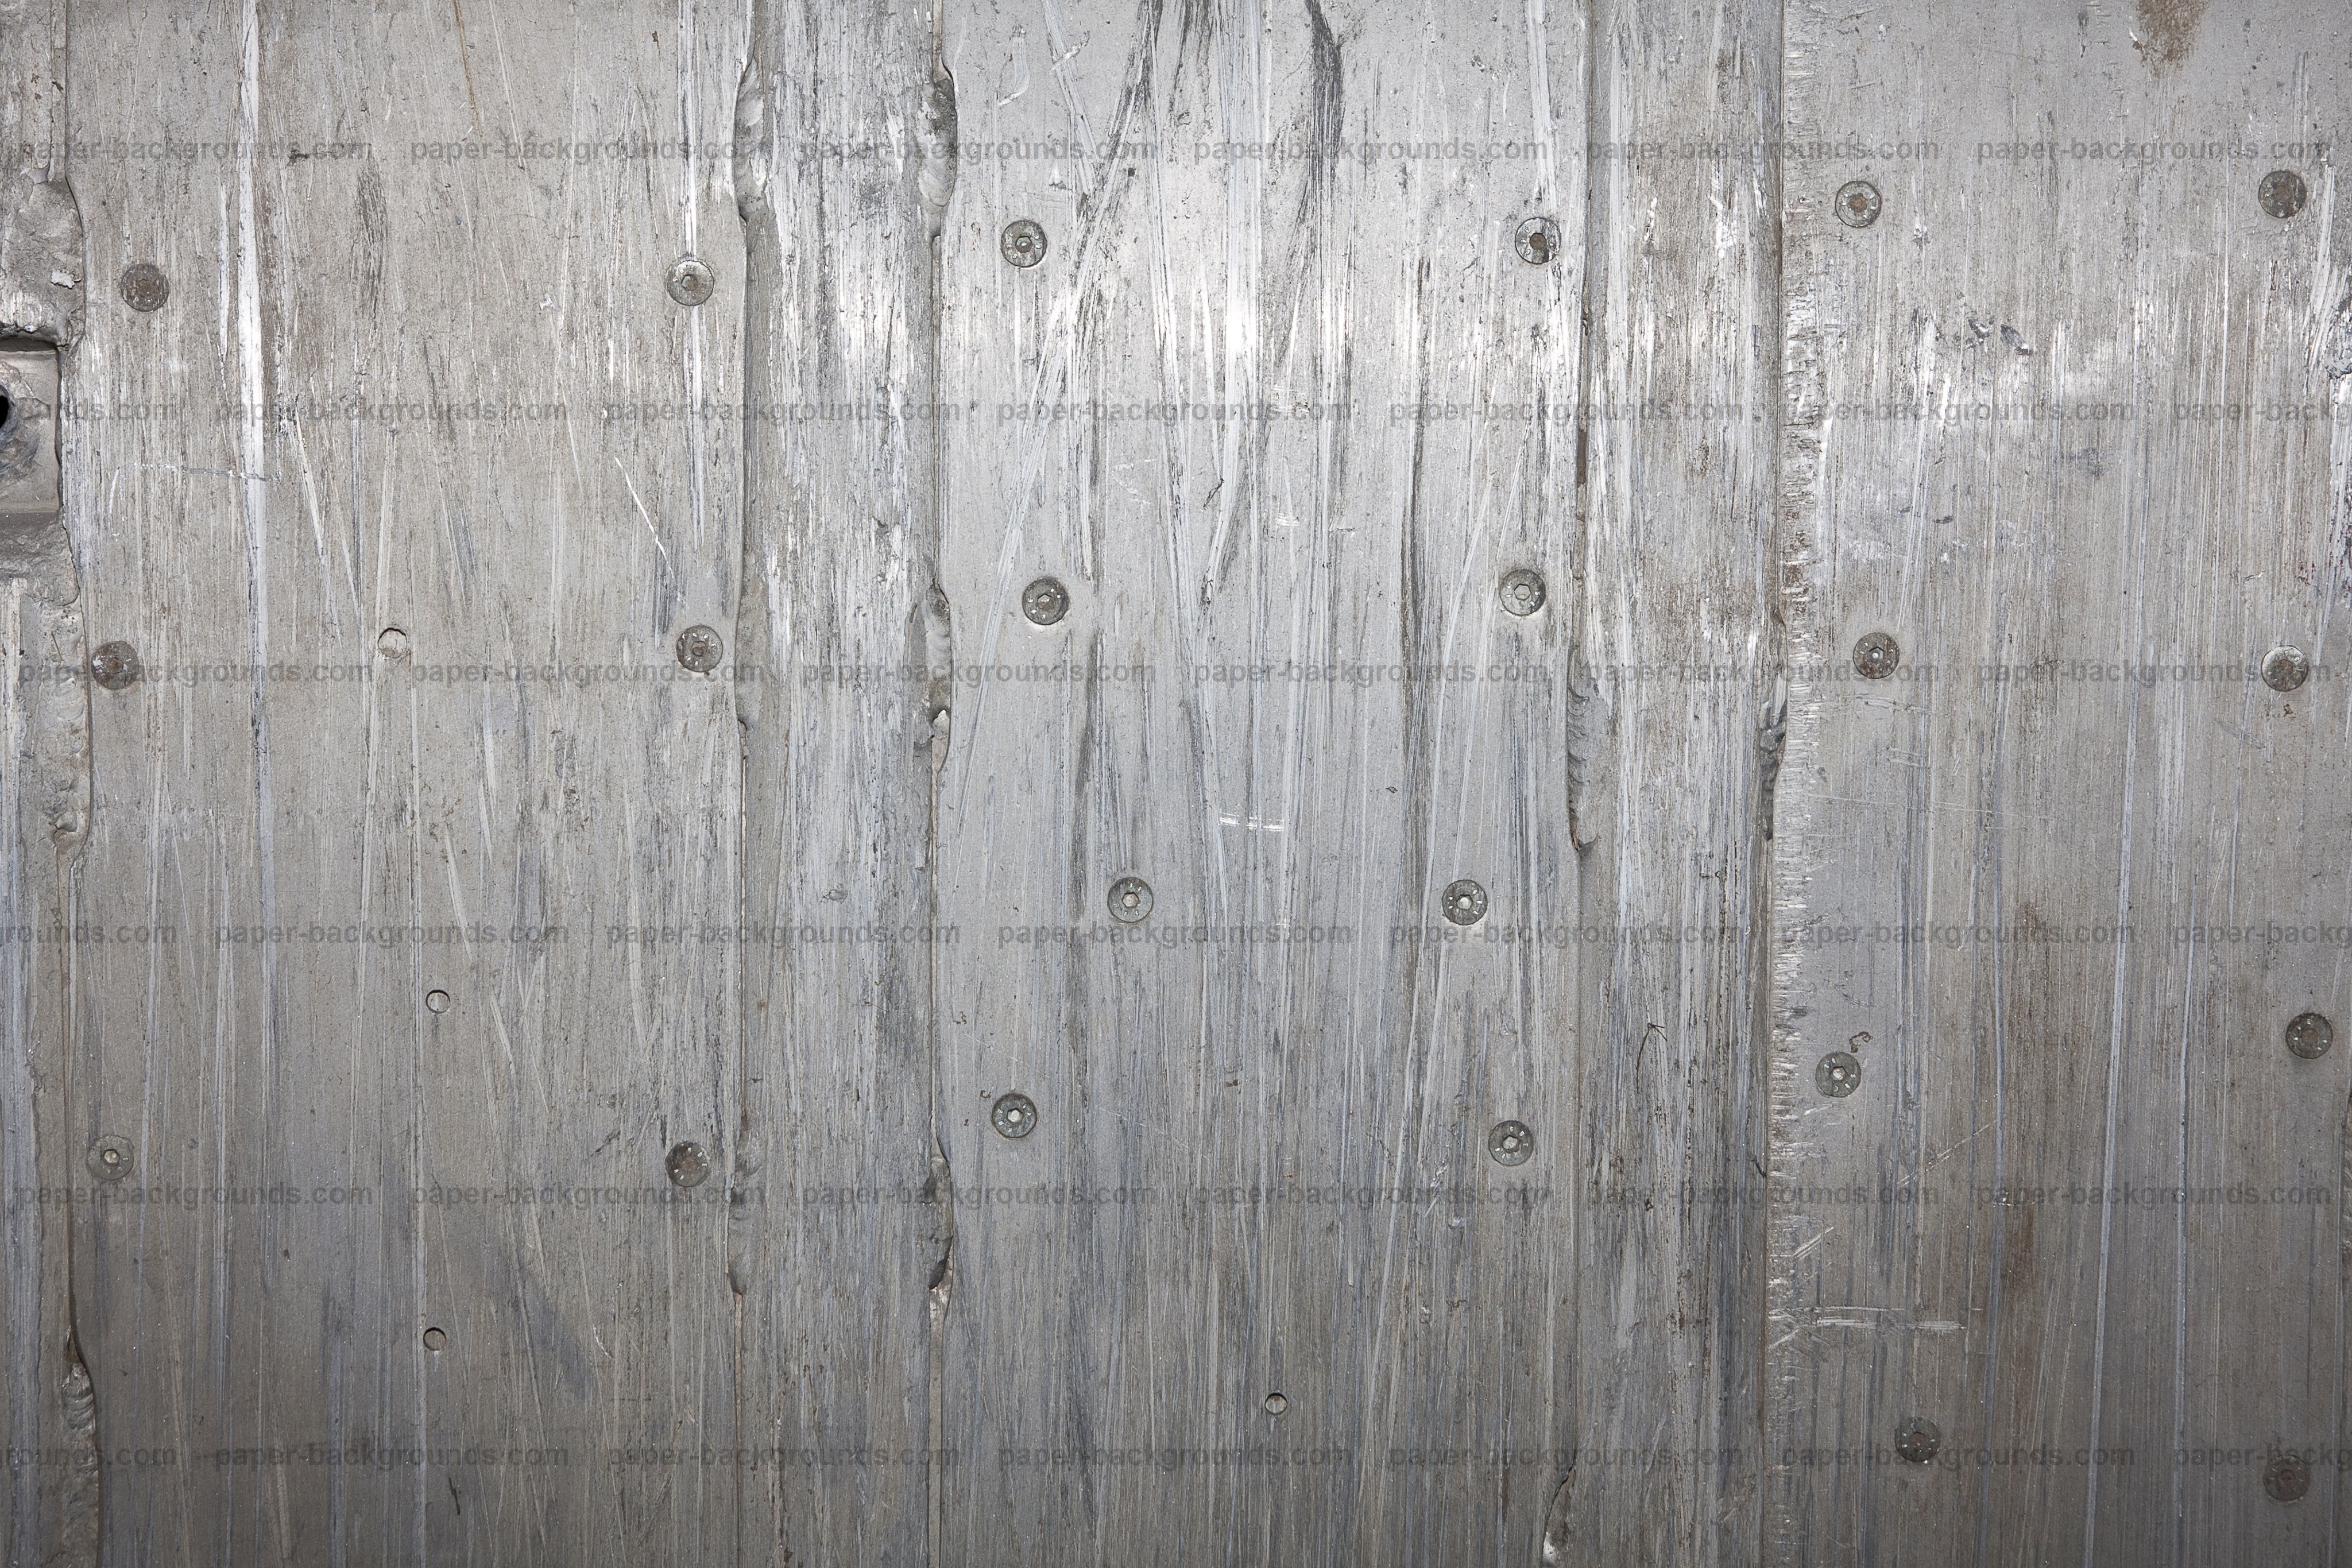 Paper Backgrounds | scratched-metal-plate-texture